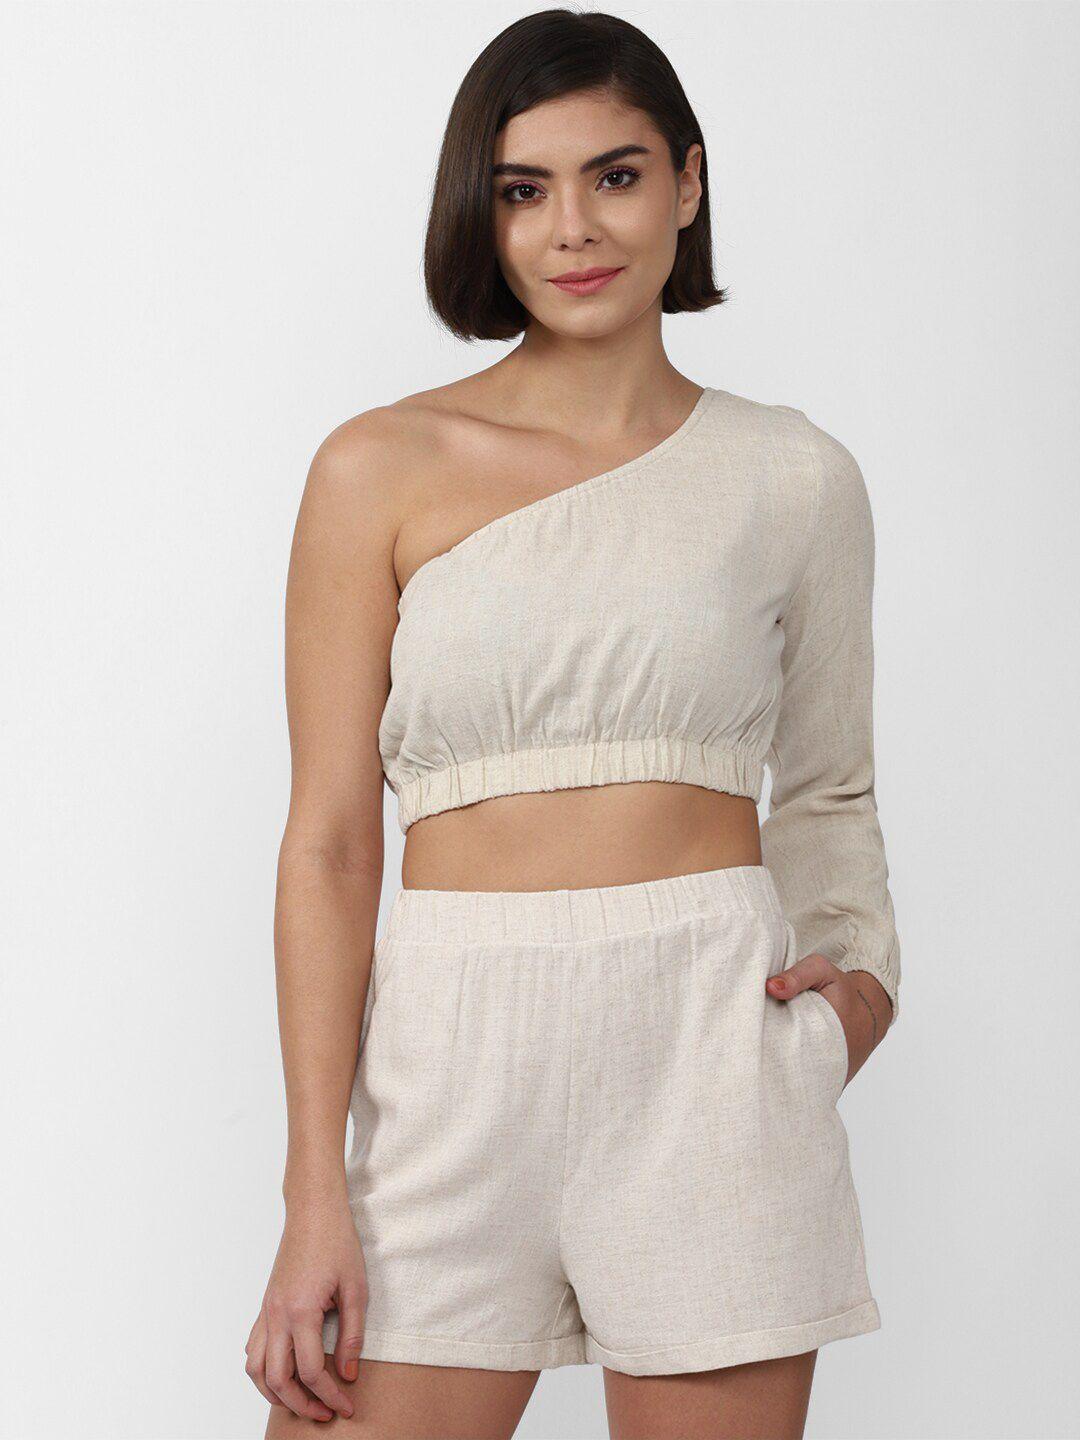 forever 21 women cream-coloured top with shorts co-ords set